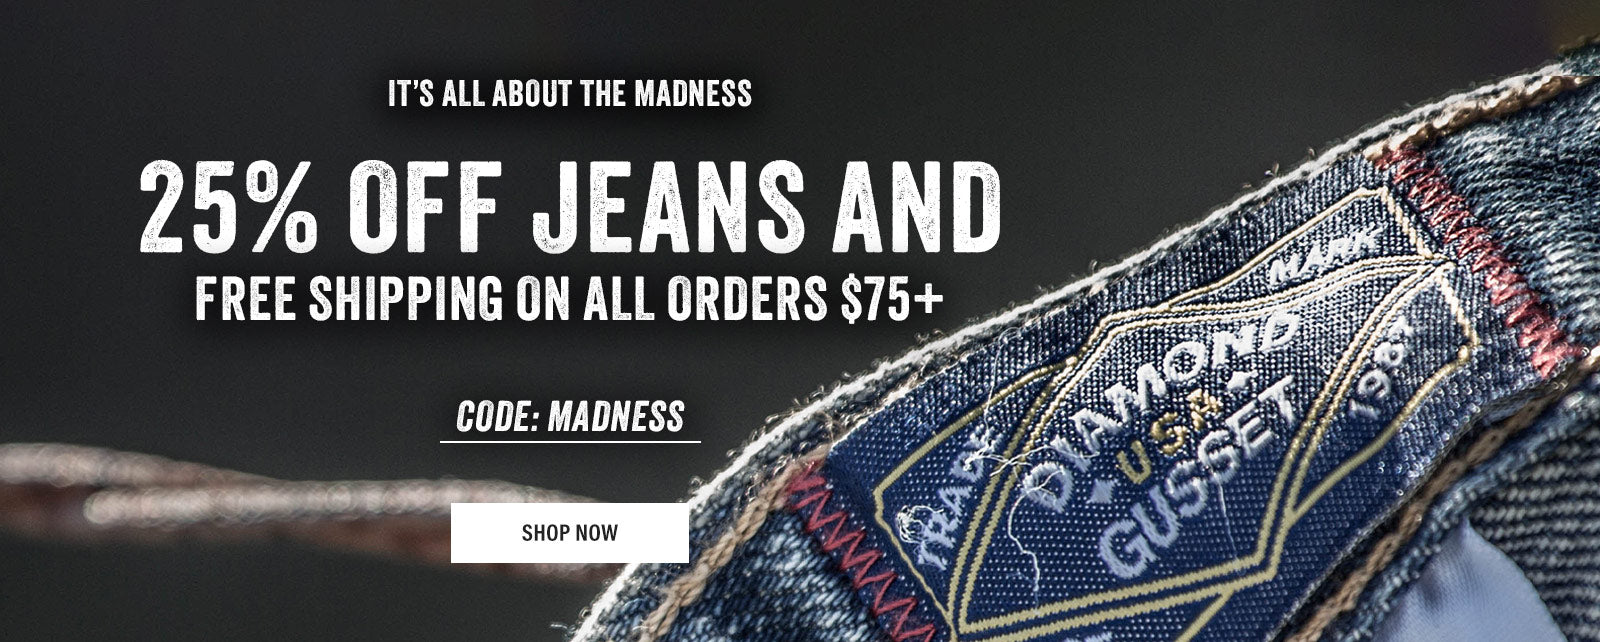 Lucky Brand Jeans Shopping Centre Clothing, jeans, blue, text png